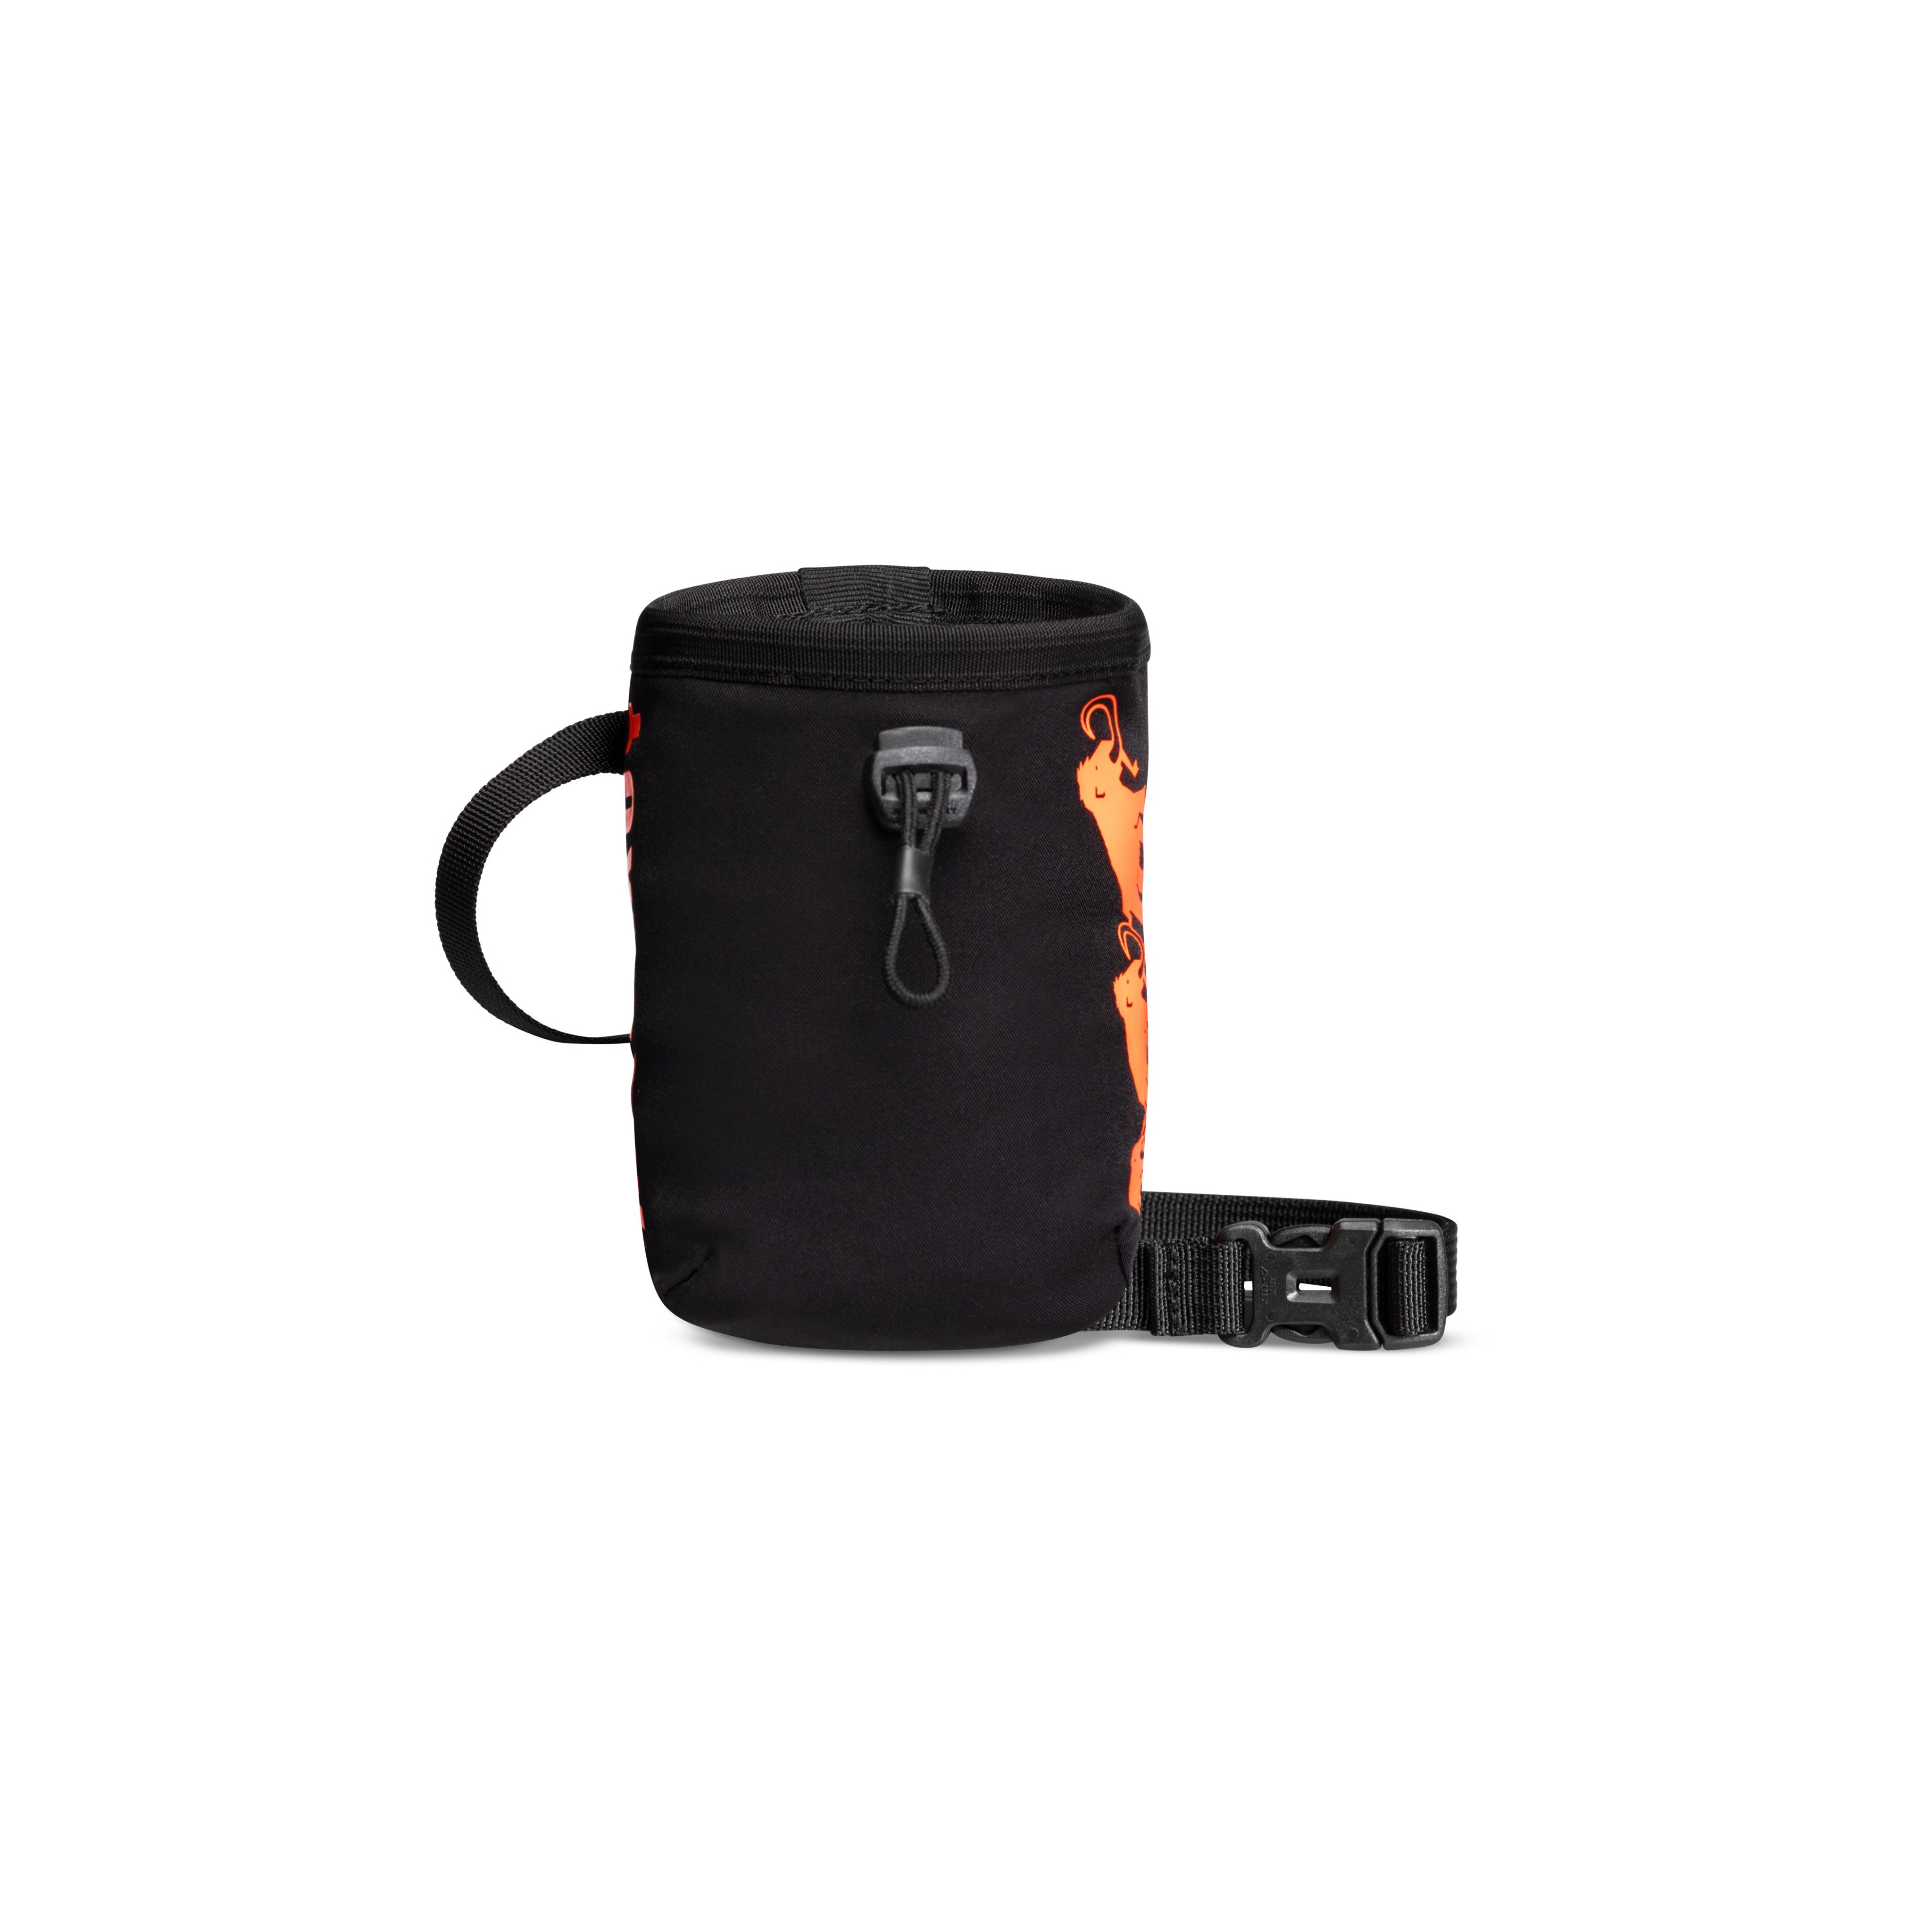 First Crag Chalk Bag - black, one size product image